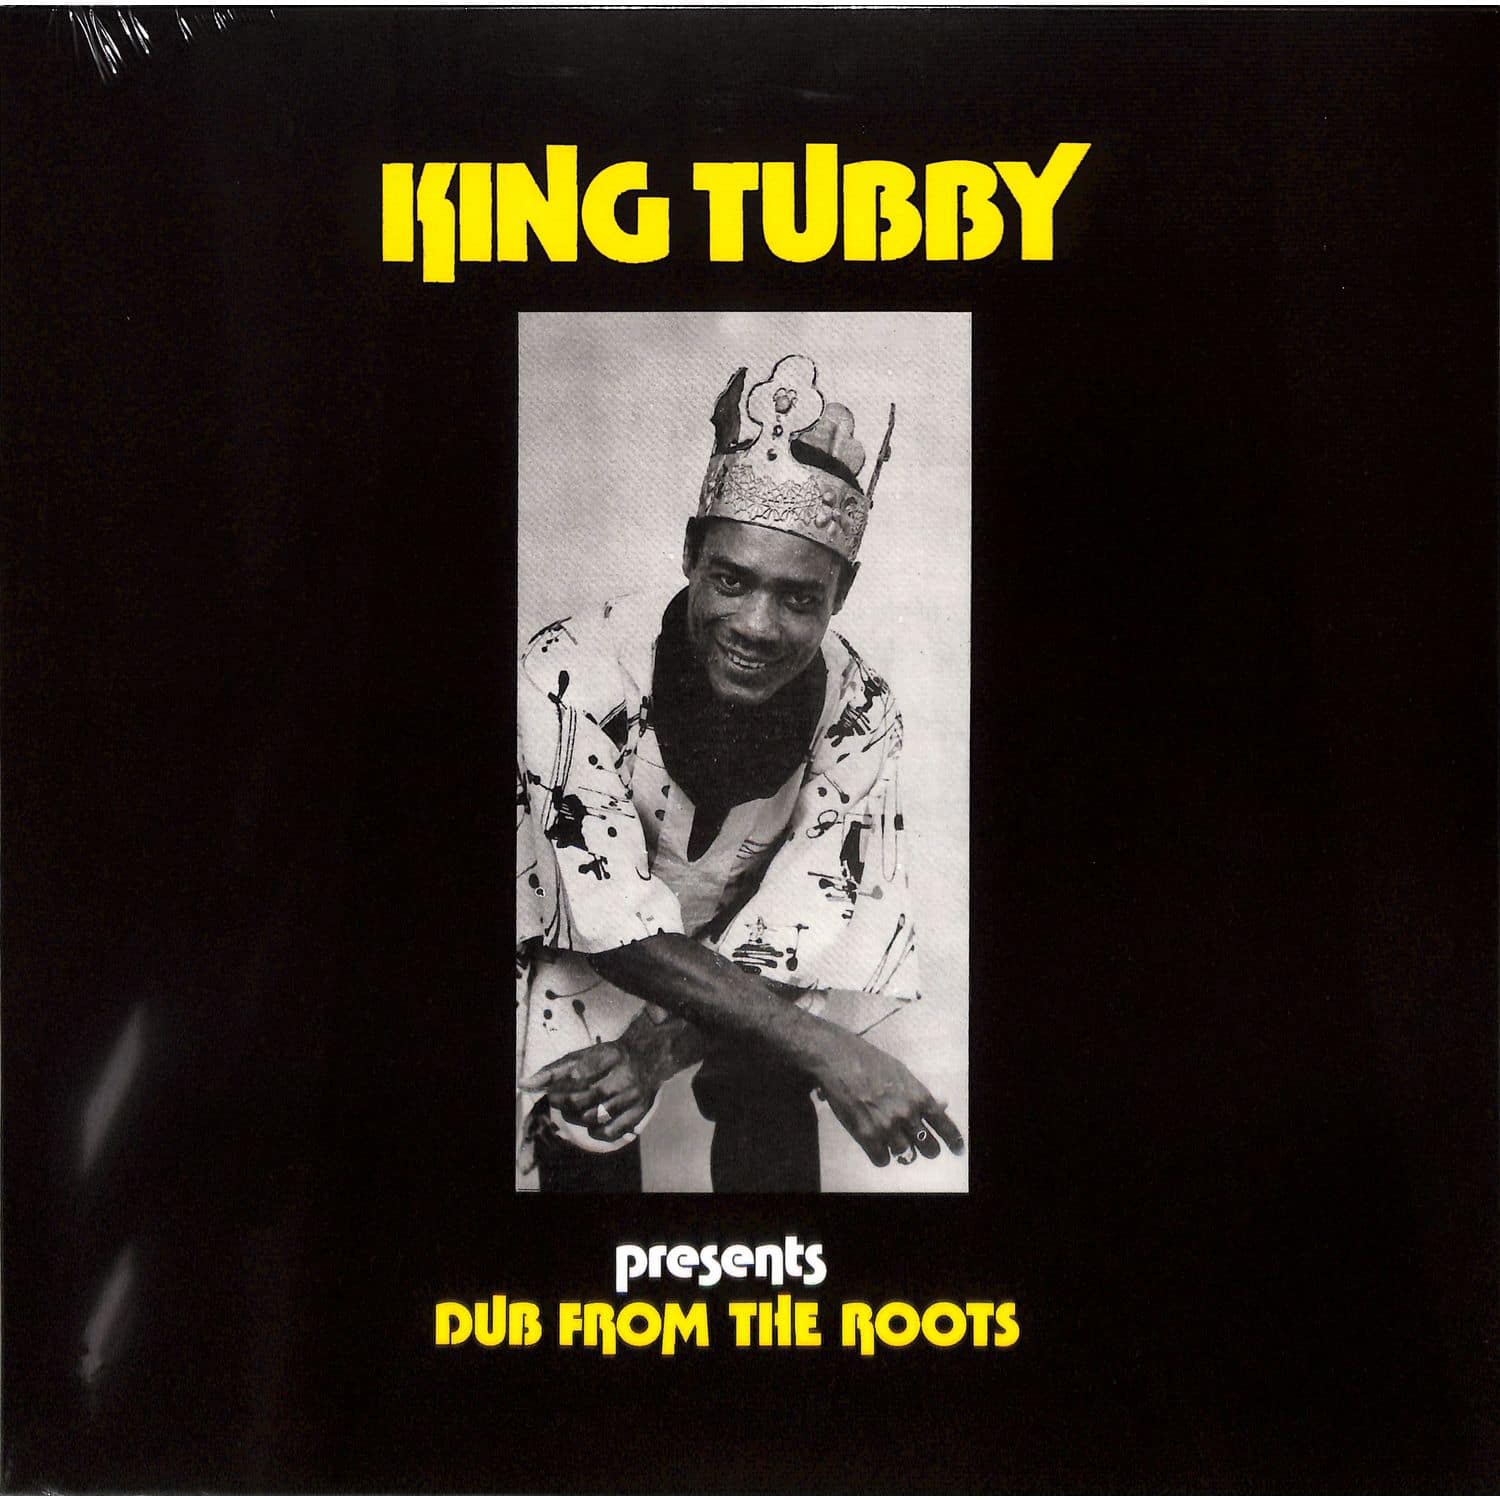 King Tubby - DUB FROM THE ROOTS 